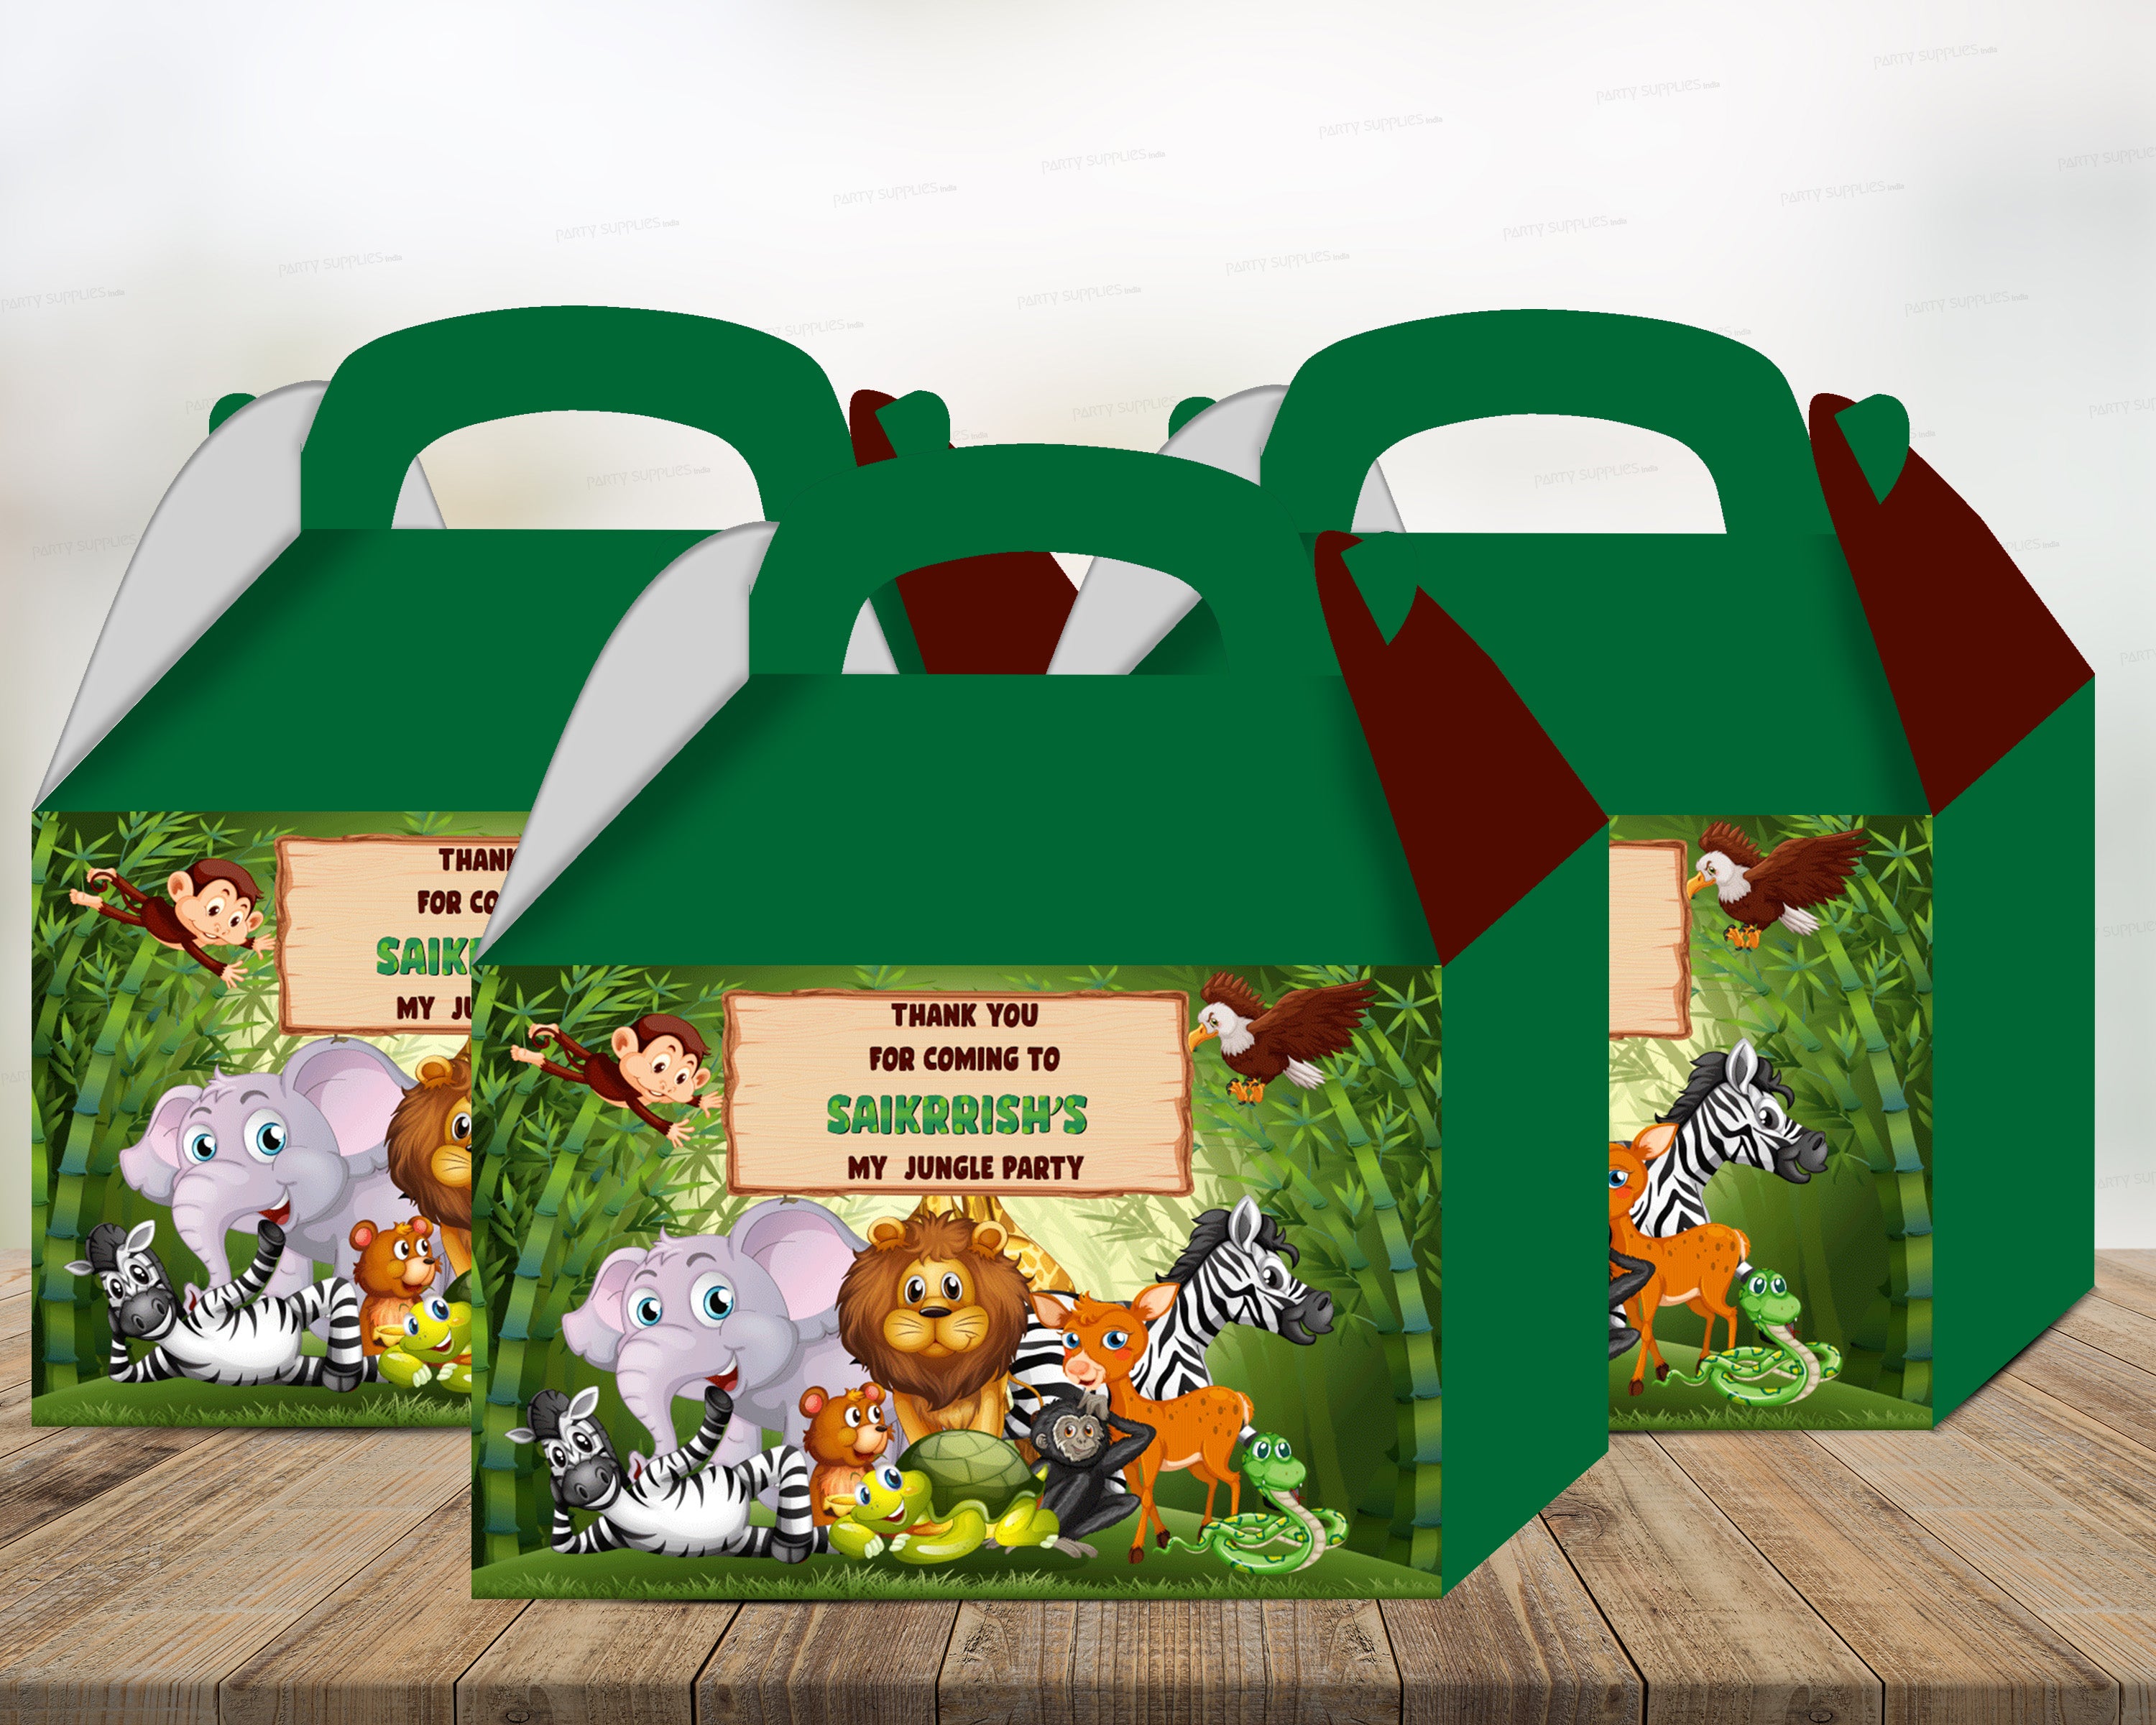 3 in 1 Safari Theme Return gifts Online Gifts|OnSALE